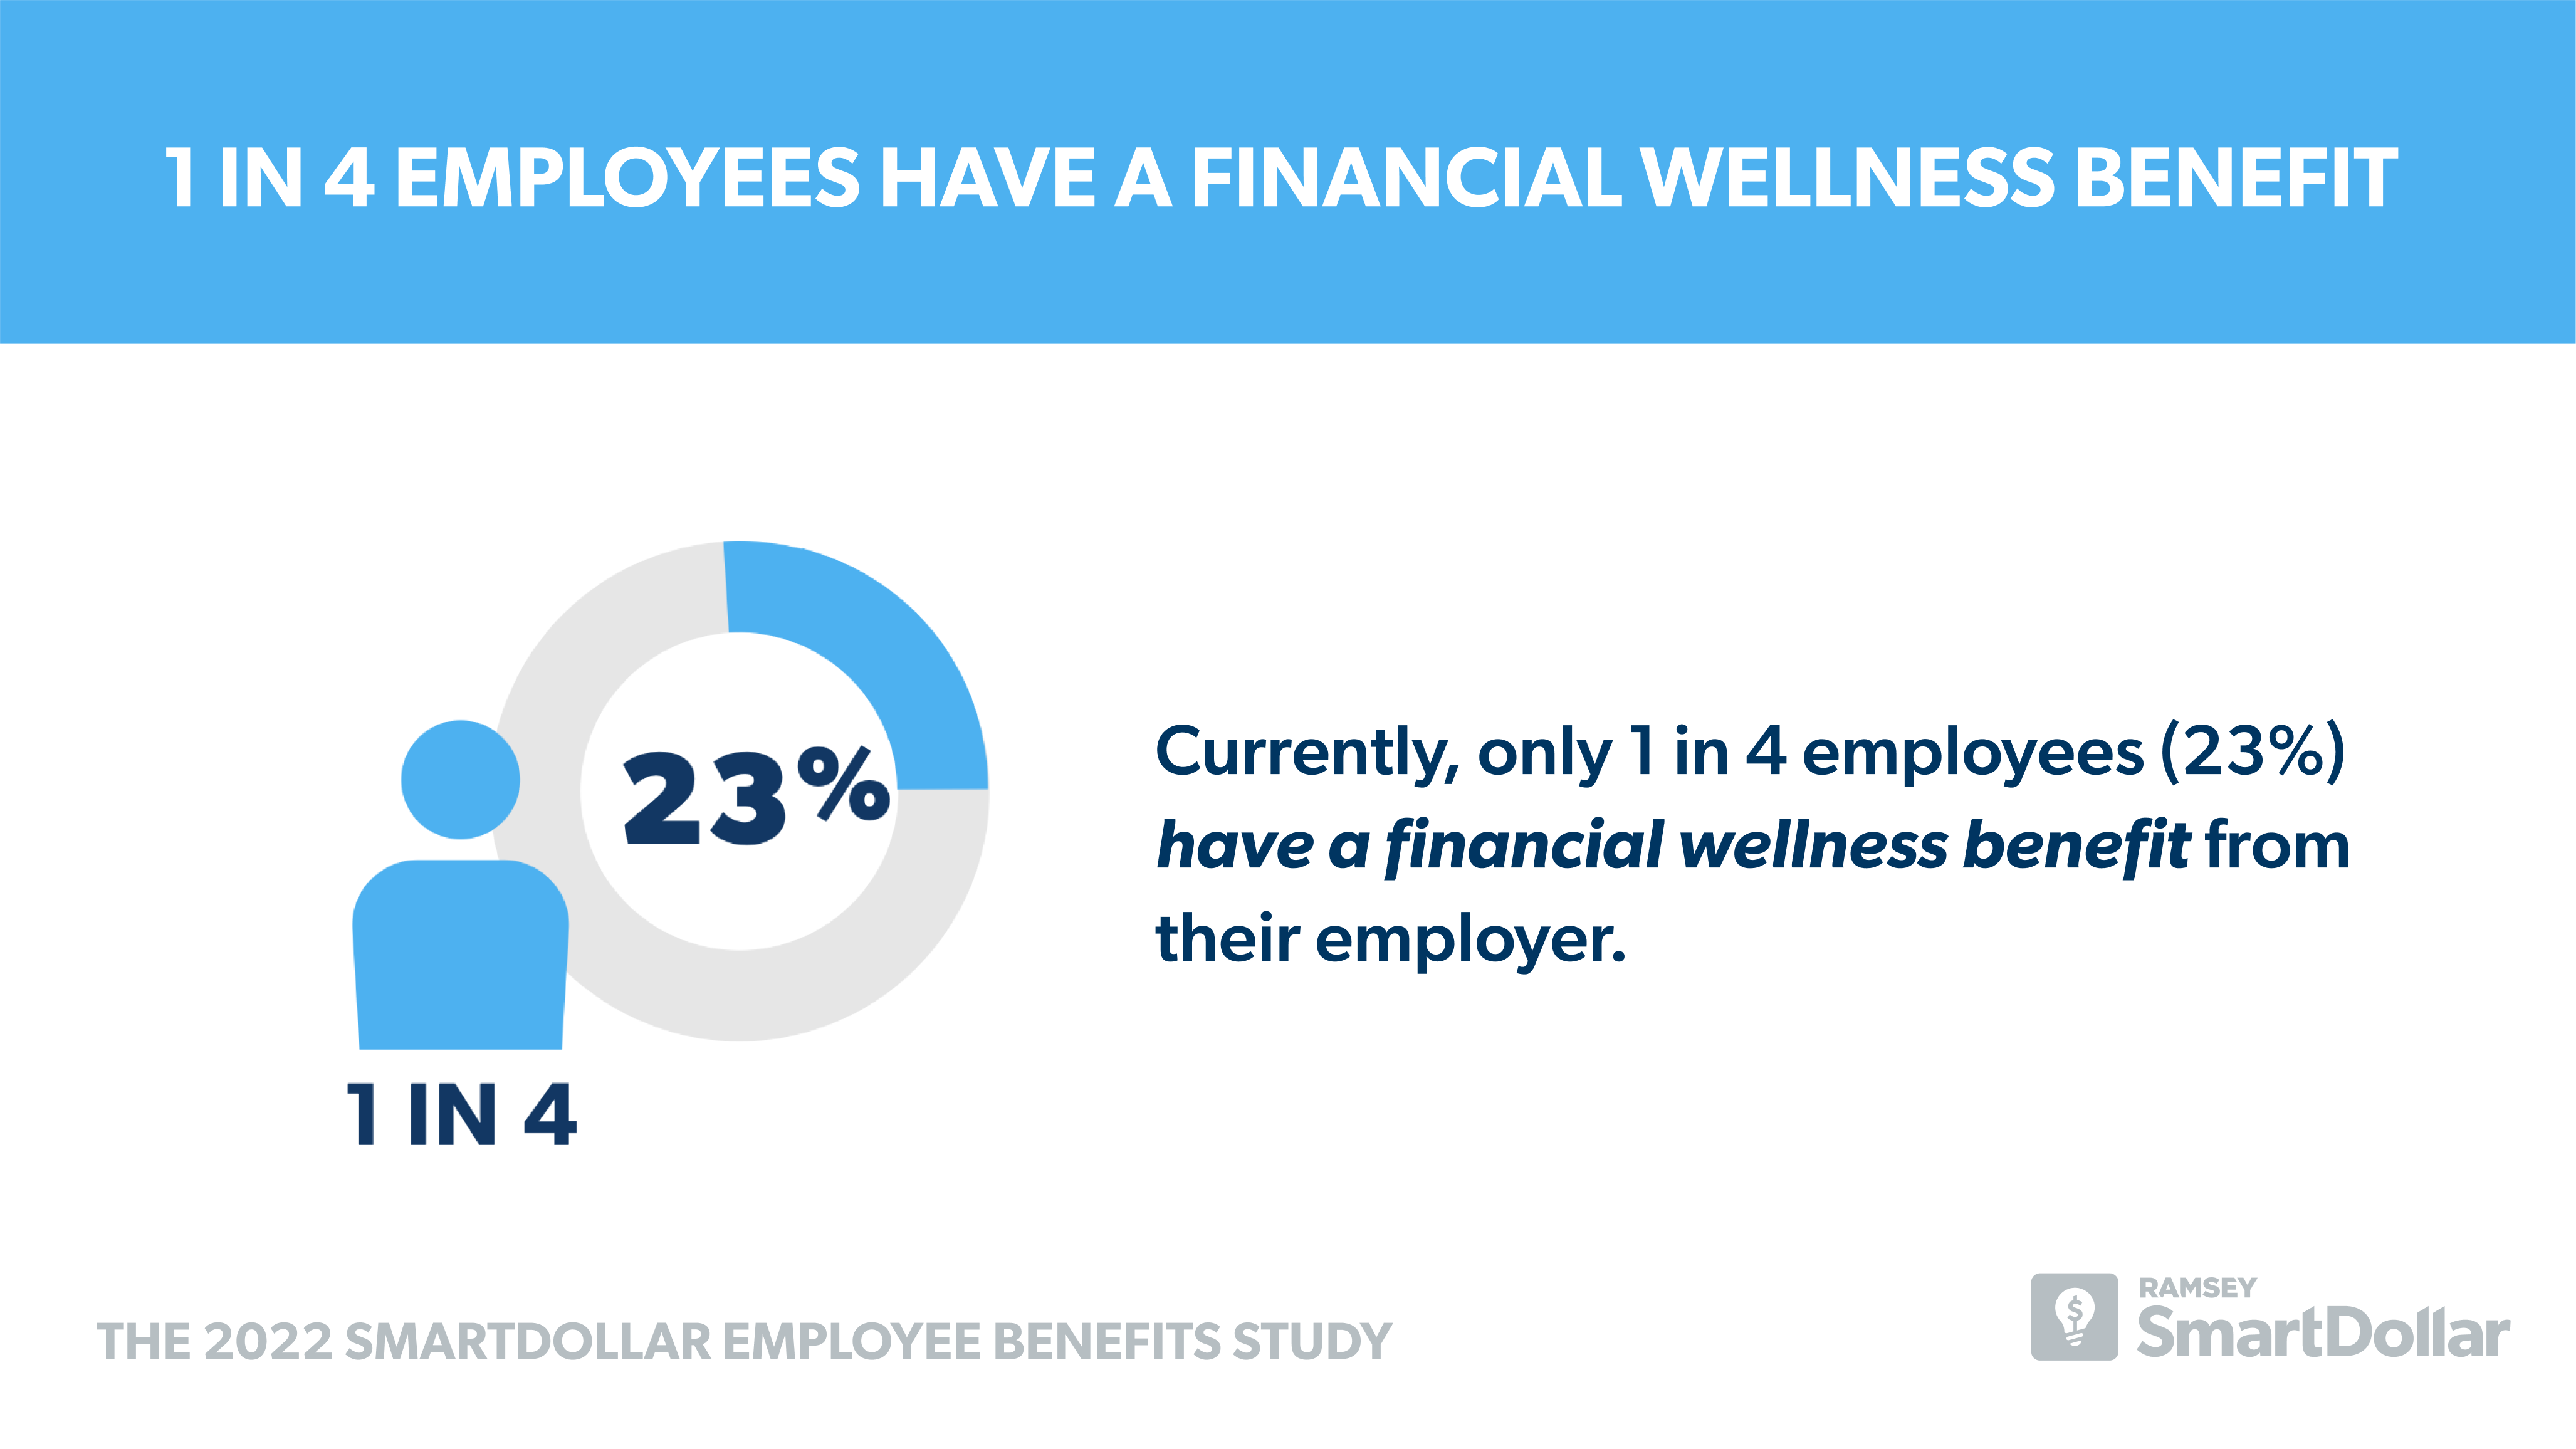 1 in 4 Employees Have a Financial Wellness Benefit 